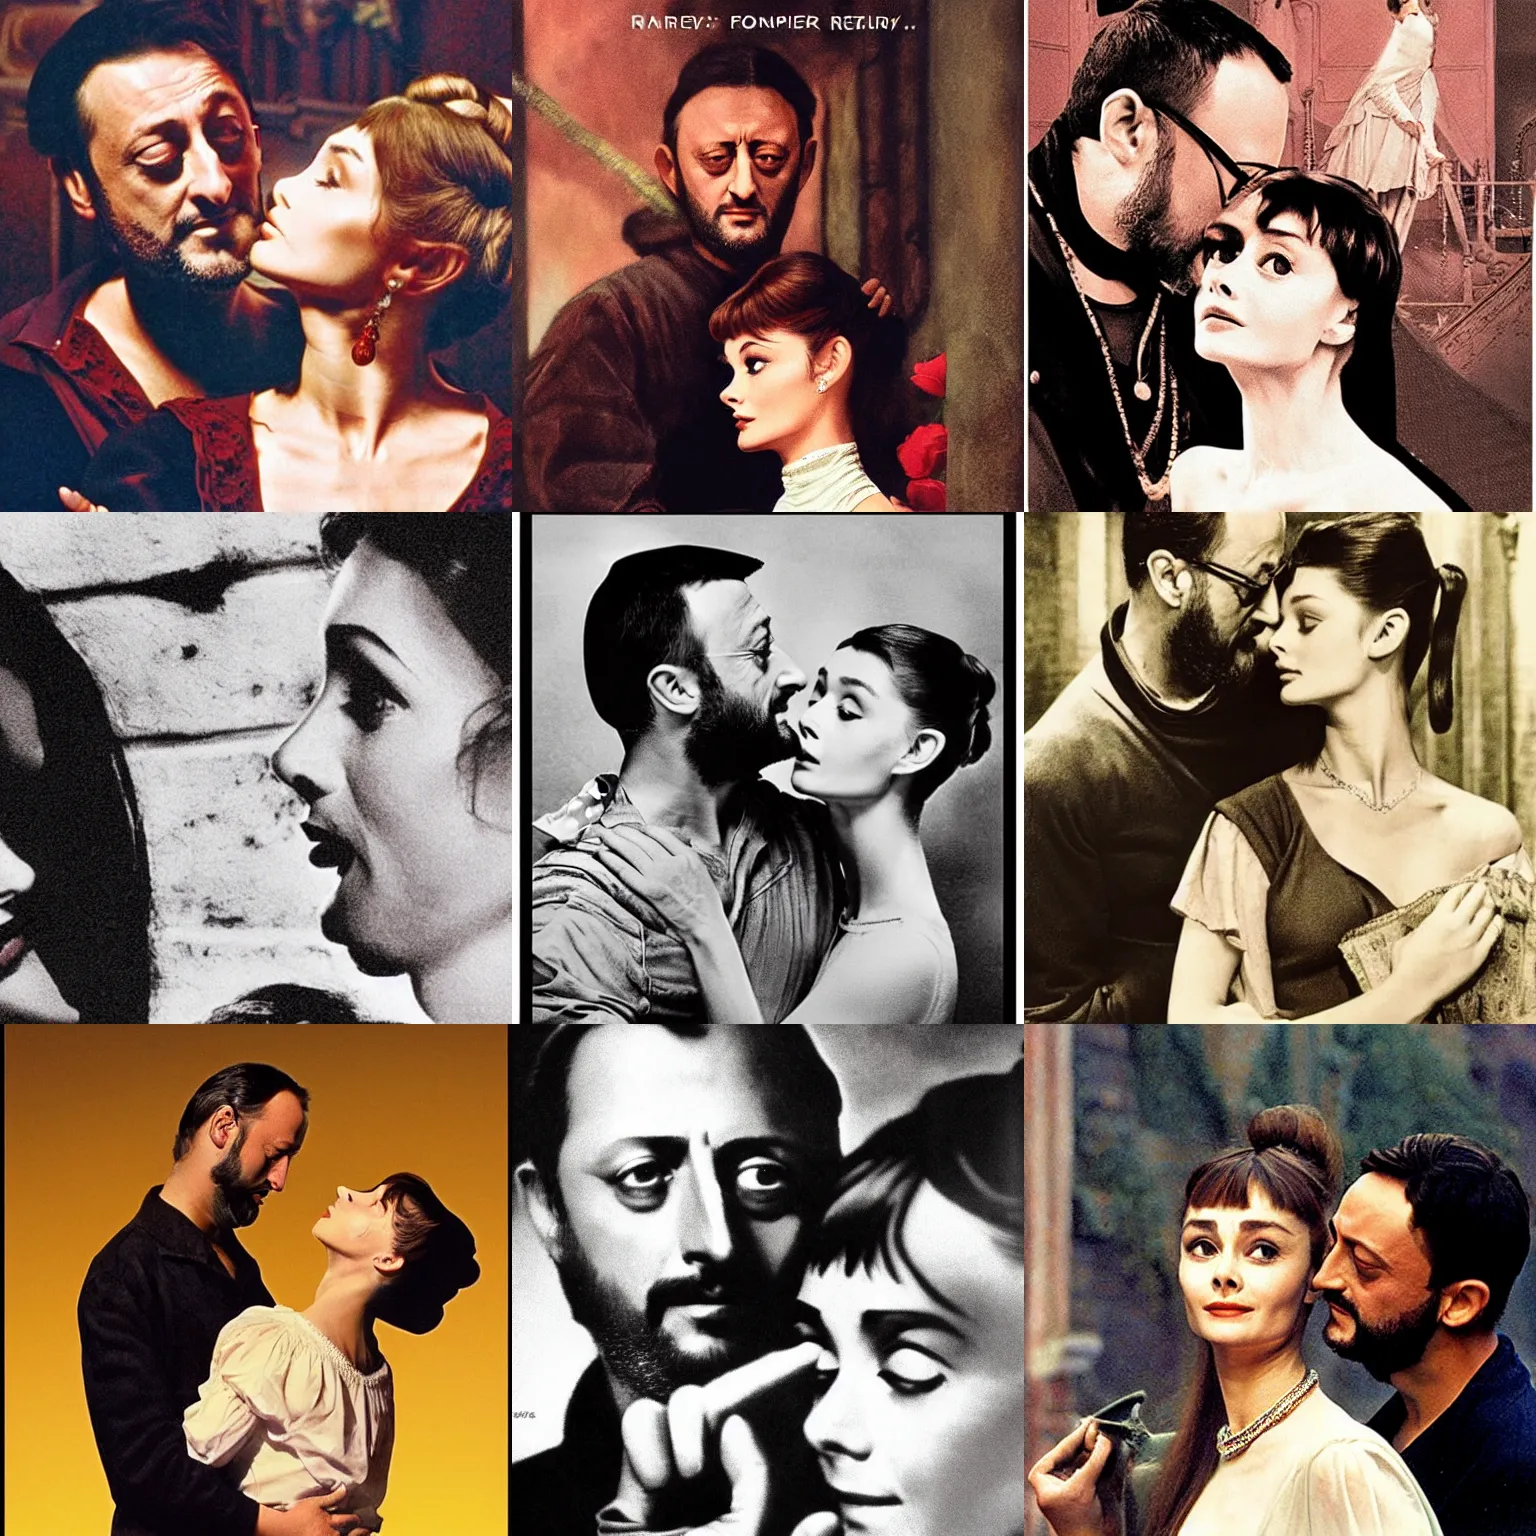 Prompt: Historical Romeo (Jean Reno) and Juliet (Audrey Hepburn), are looking at each other romantically. romantic, tragic, restrained, lumnious, smooth, sharp focus, 18th theater poster by rank Dicksee, Alfred Elmore, Mather Brown